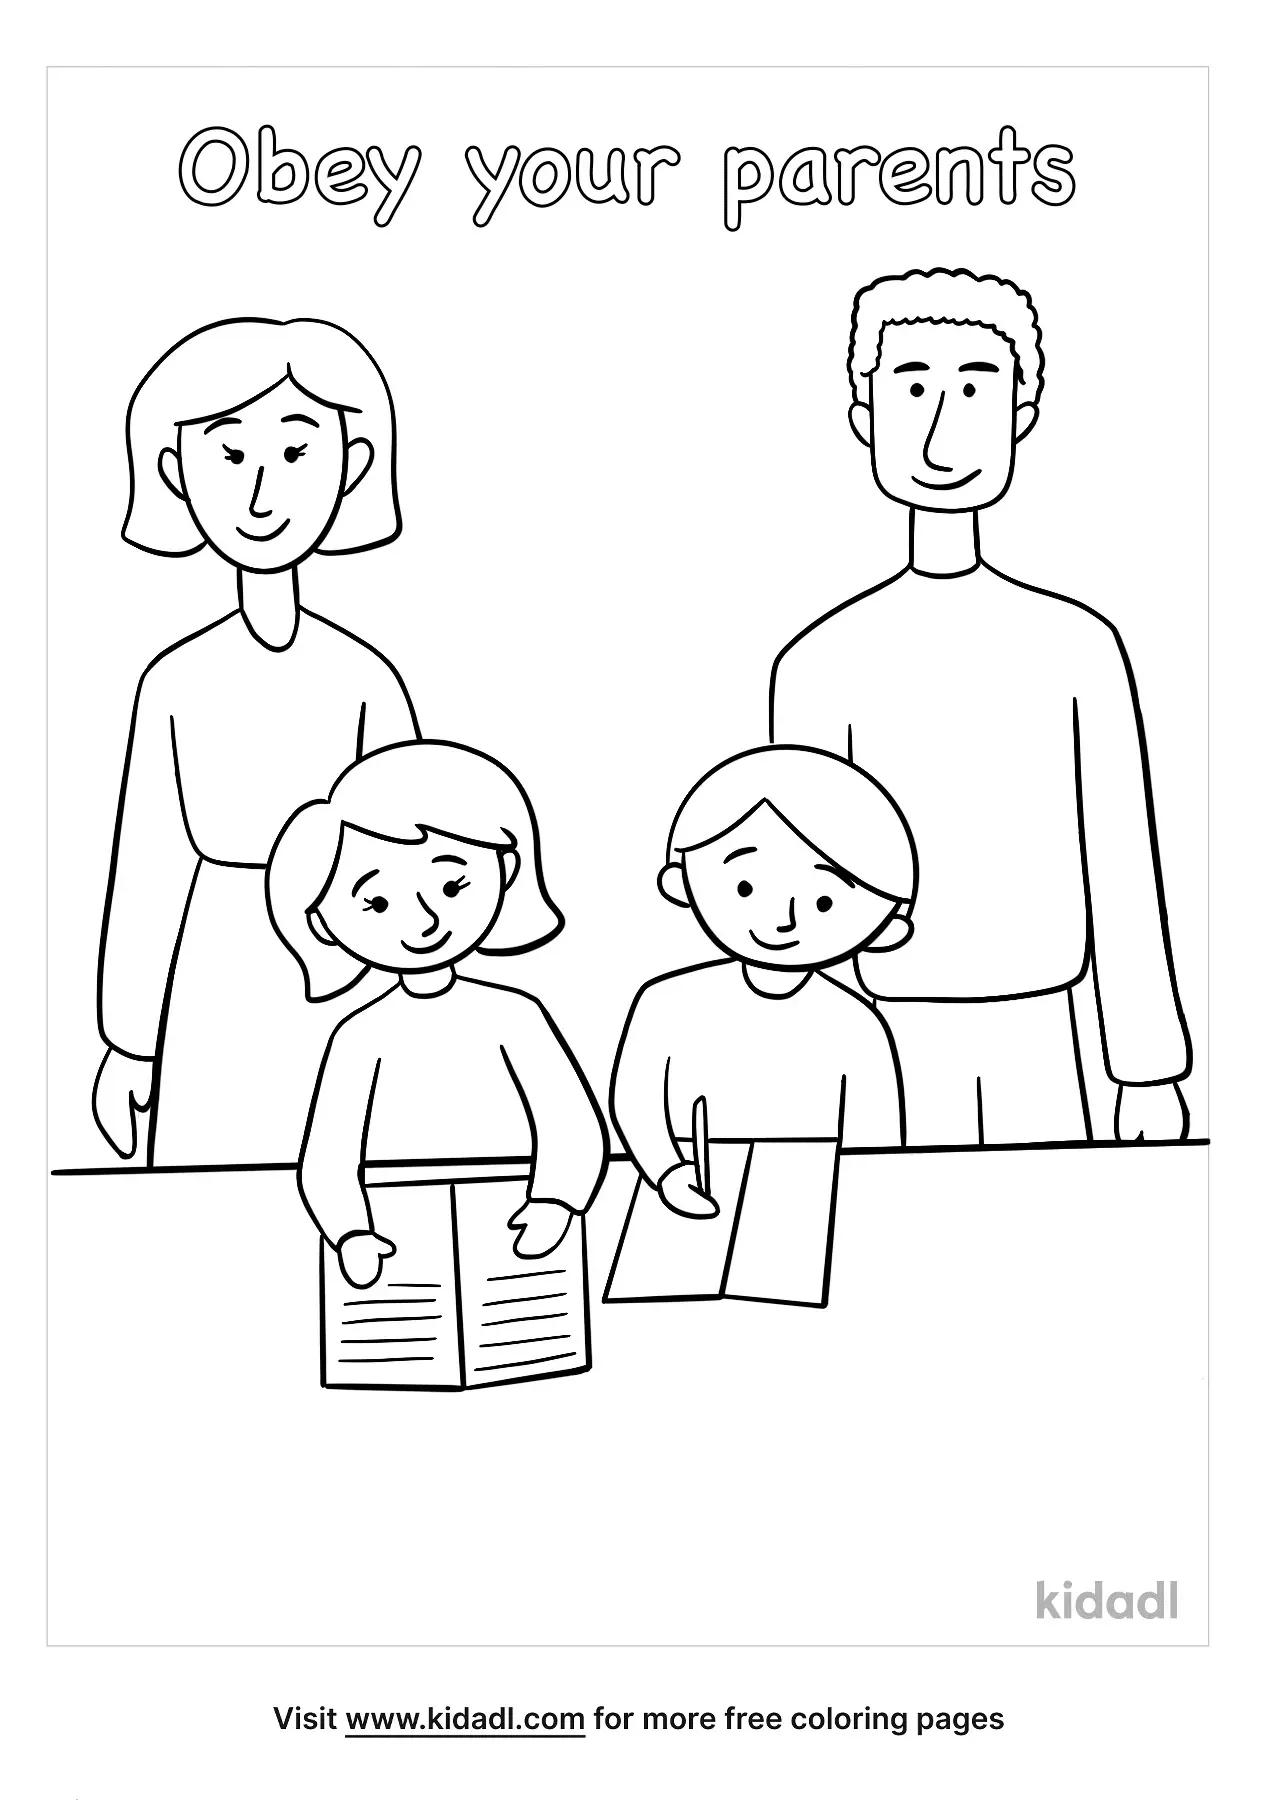 free-children-obey-your-parents-coloring-page-coloring-page